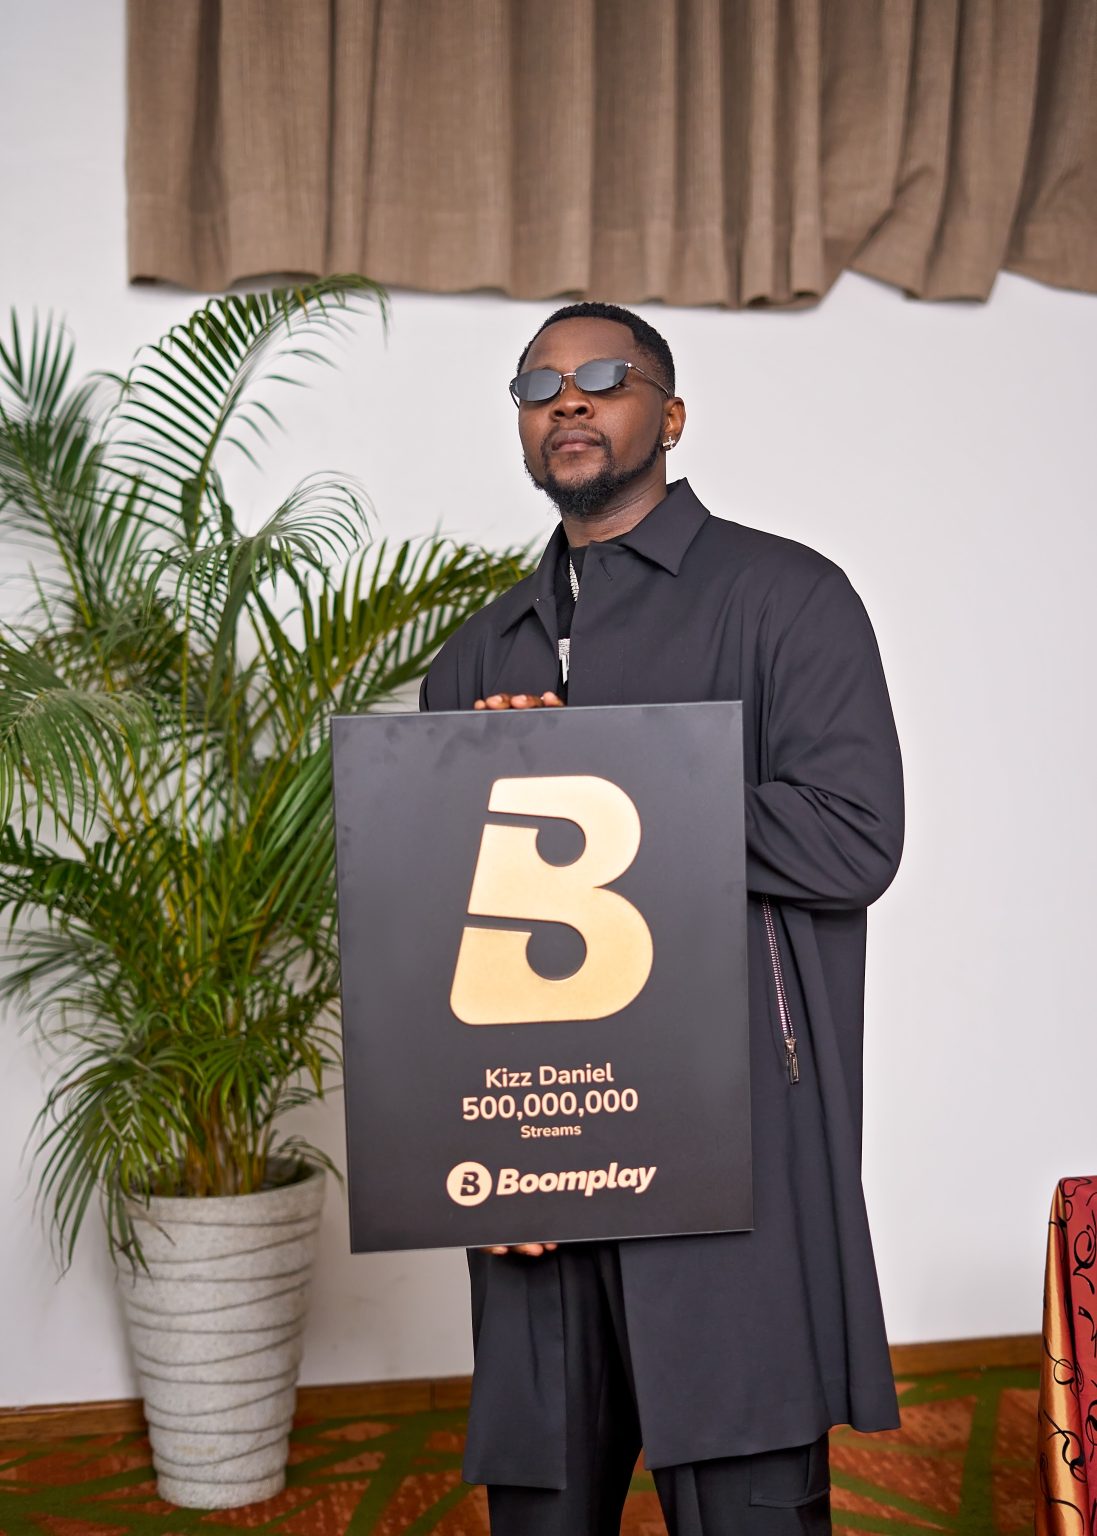 Kizz Daniel Gets Gold Plaque For Hitting 500 Million Streams On Boomplay